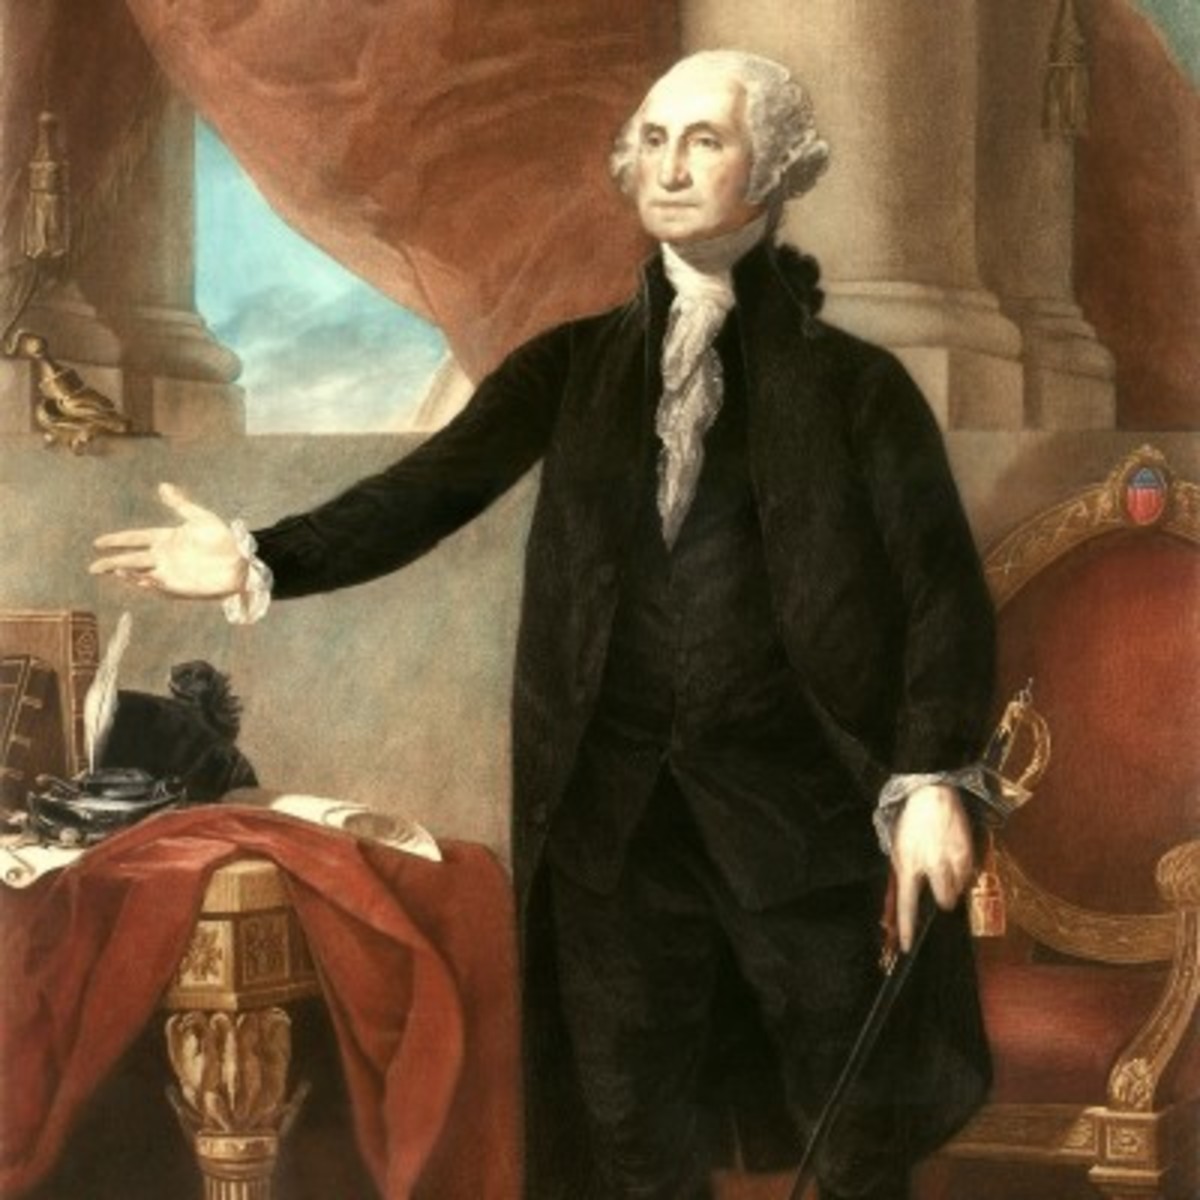 On his last day in office in the book, President Washington wears his black velvet suit.